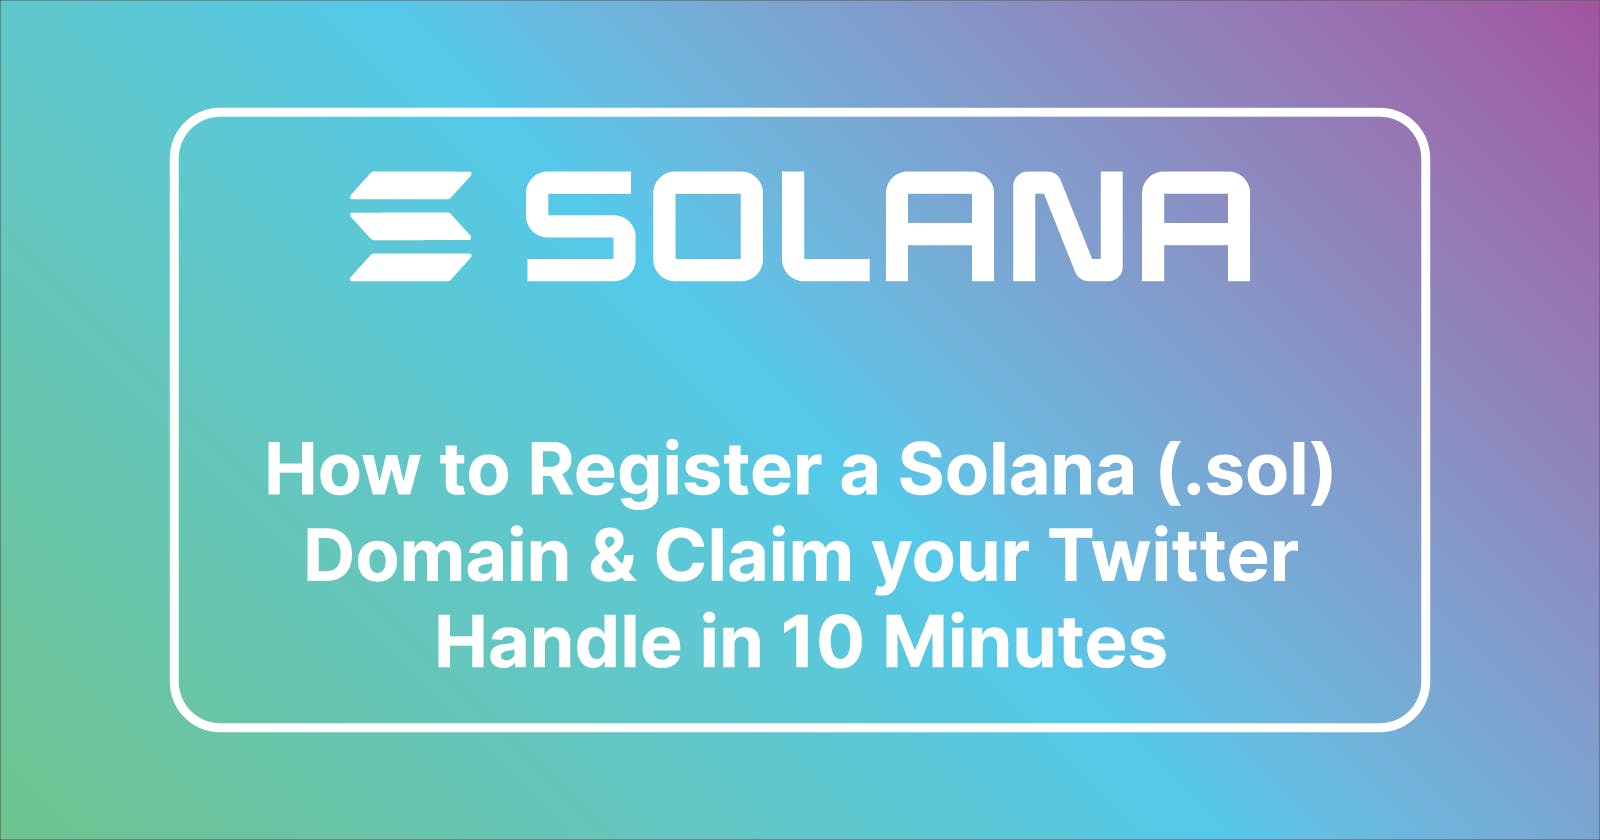 How to Register a Solana (.sol) Domain & Claim your Twitter Handle in 10 Minutes